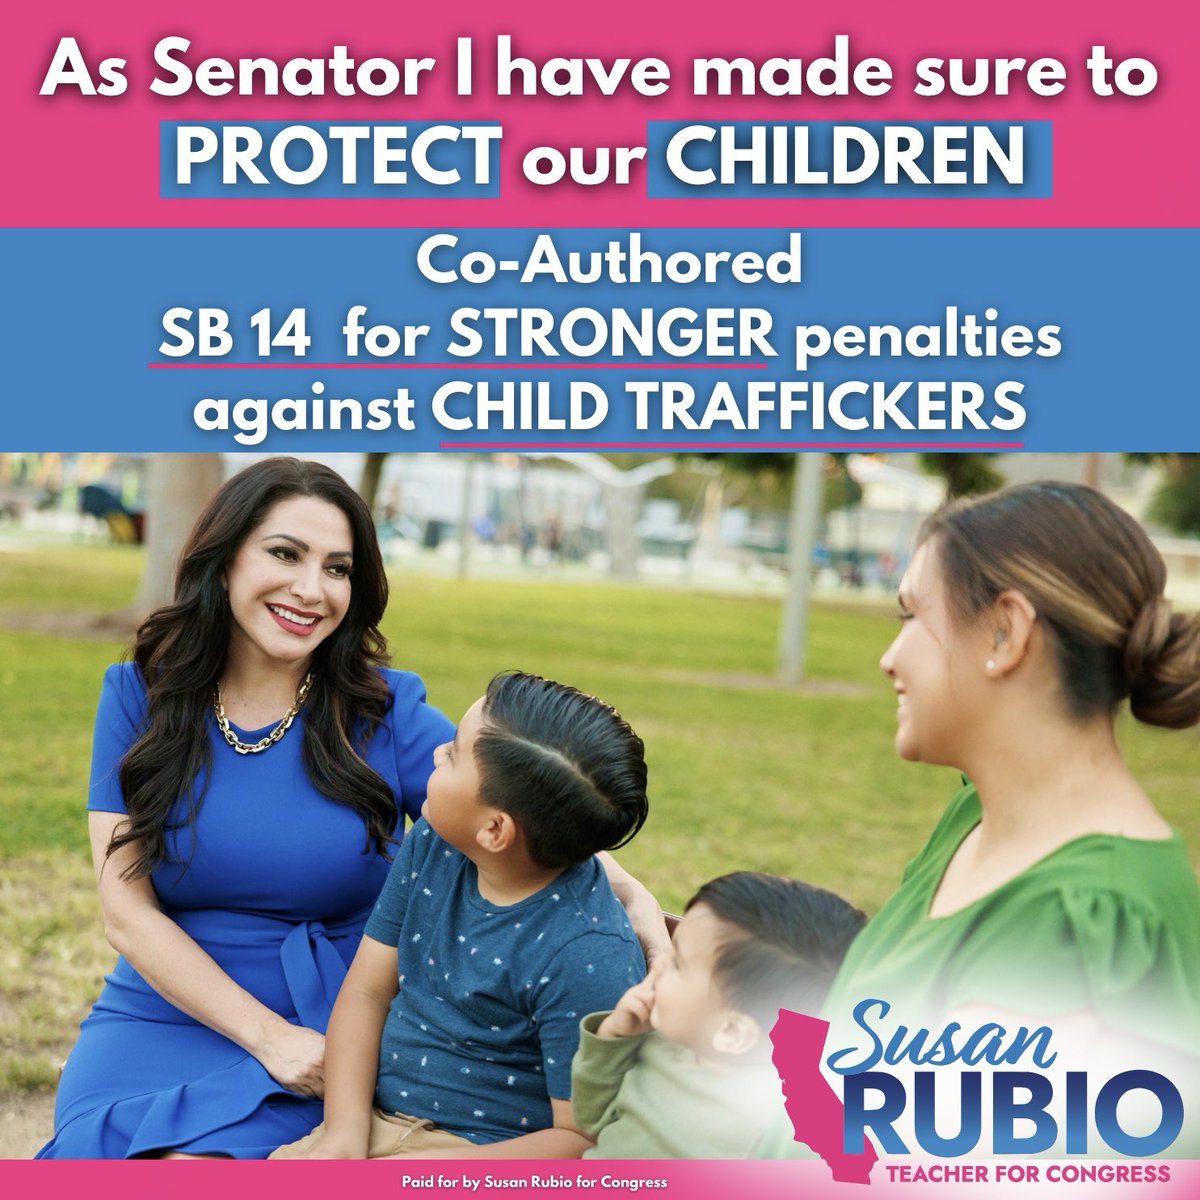 As Senator, I've fought to protect the vulnerable. Now, aiming to serve #CA31 in Congress, let's strengthen our fight for our children and families. Proud co-author of #SB14, targeting #childtraffickers. Join me to ensure every child's safety. #SGV #ElMonte #WestCovina #duarte